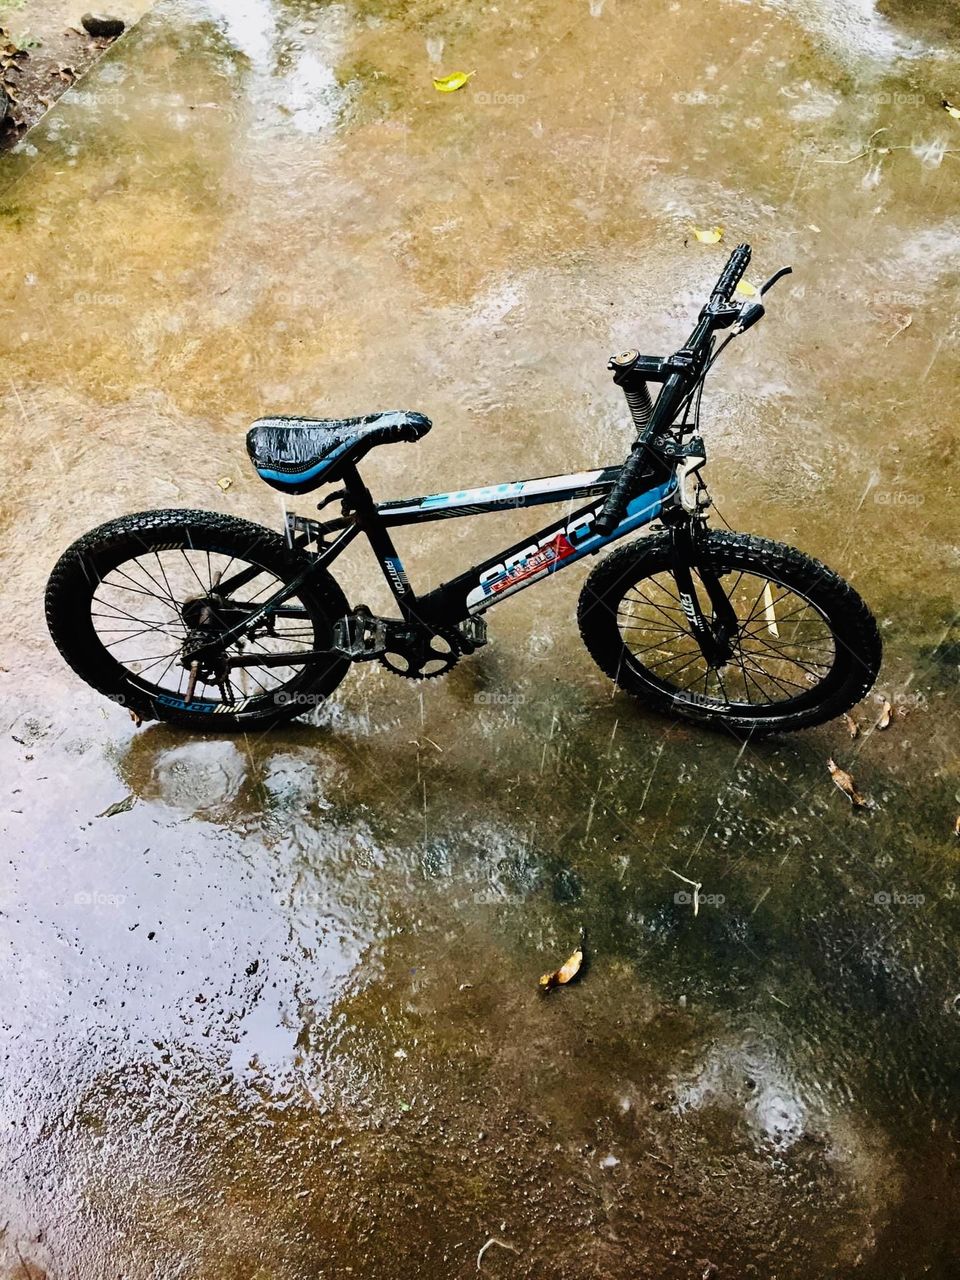 One lonely bicycle under the heavy rain 